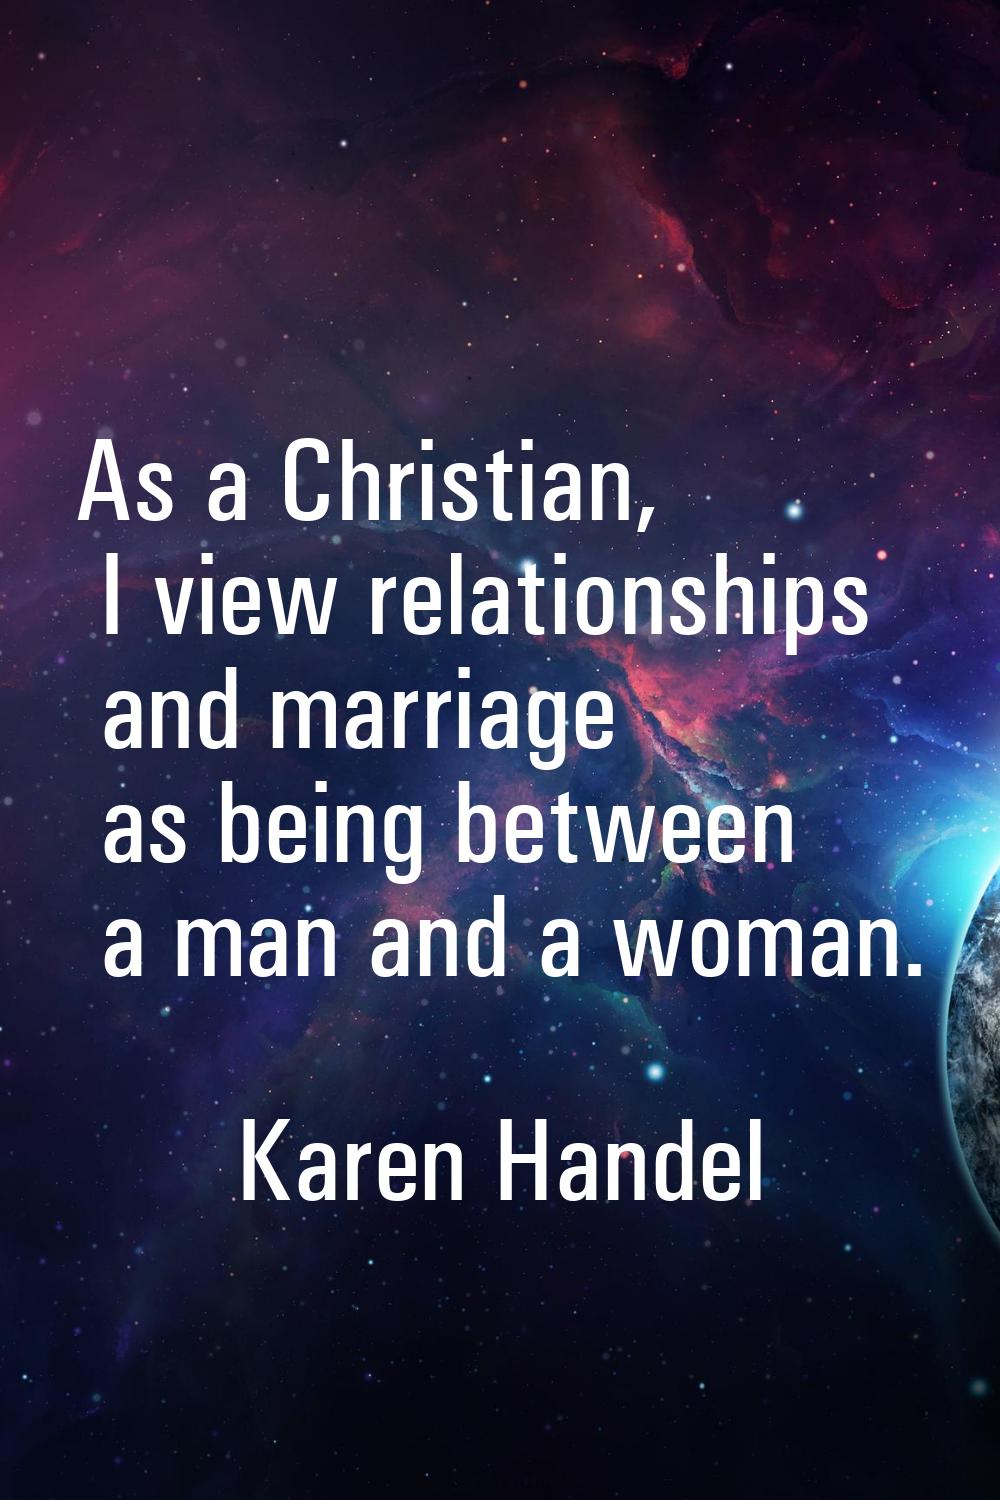 As a Christian, I view relationships and marriage as being between a man and a woman.